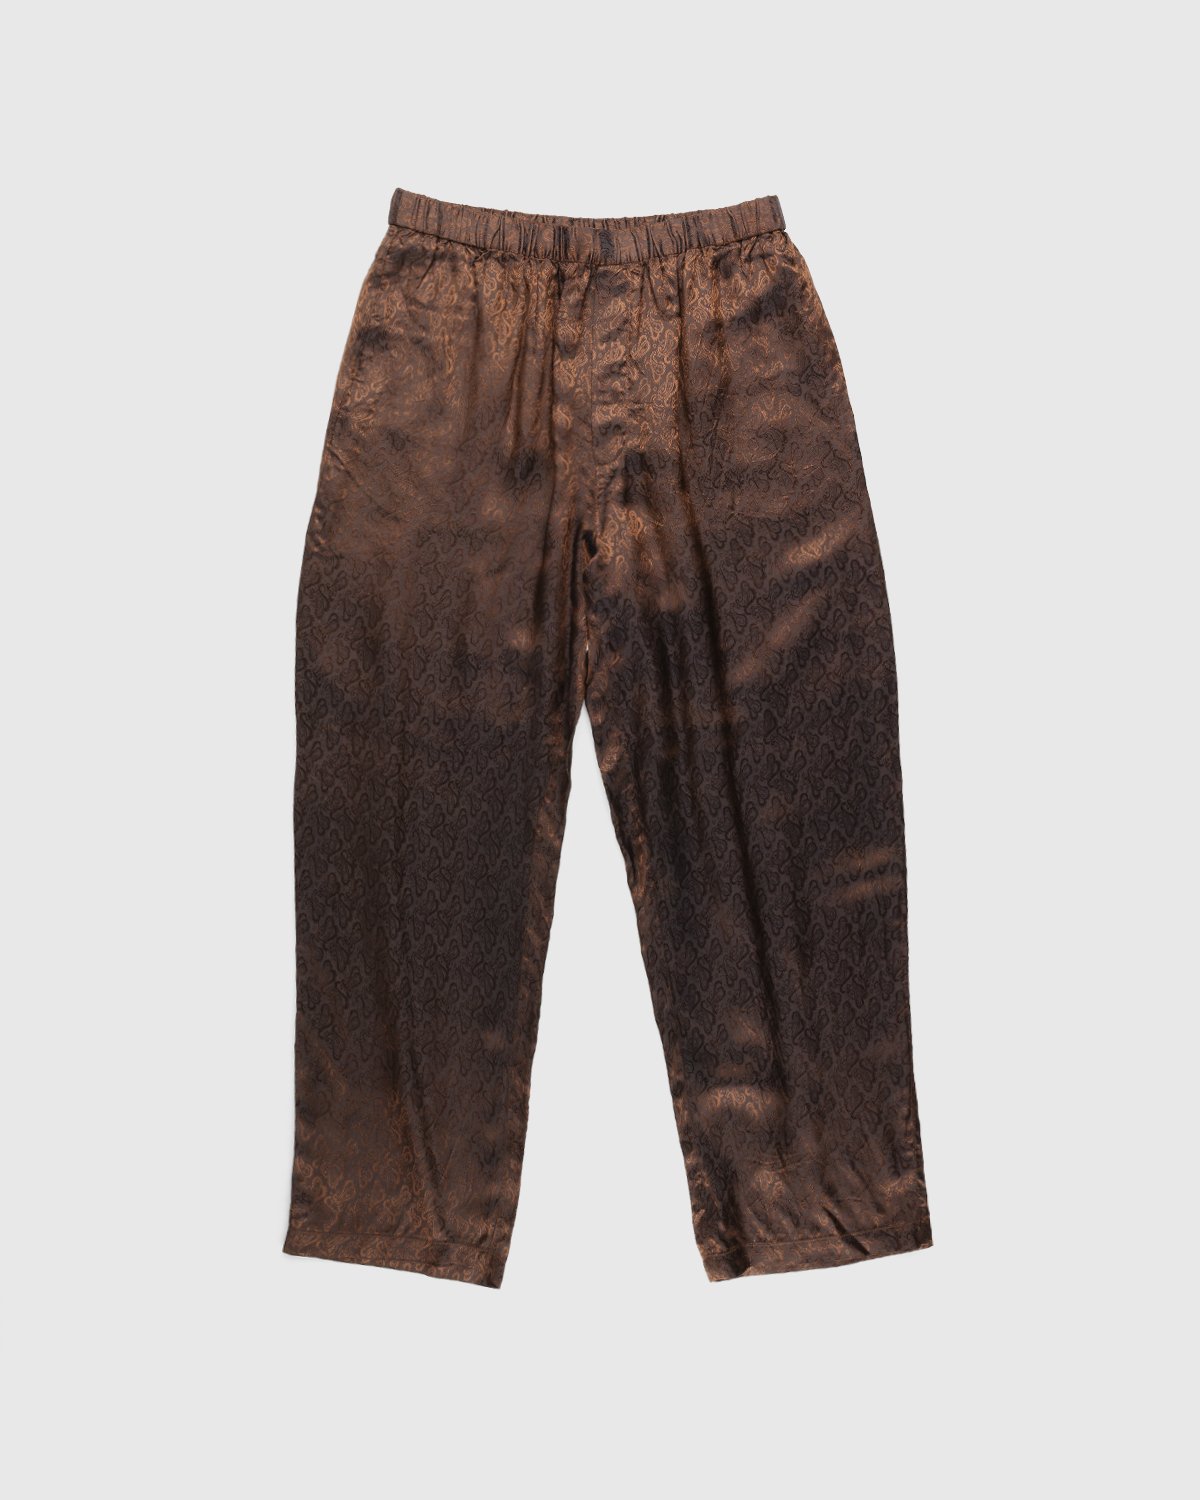 Acne Studios - Jacquard Trousers Brown - Clothing - Brown - Image 1